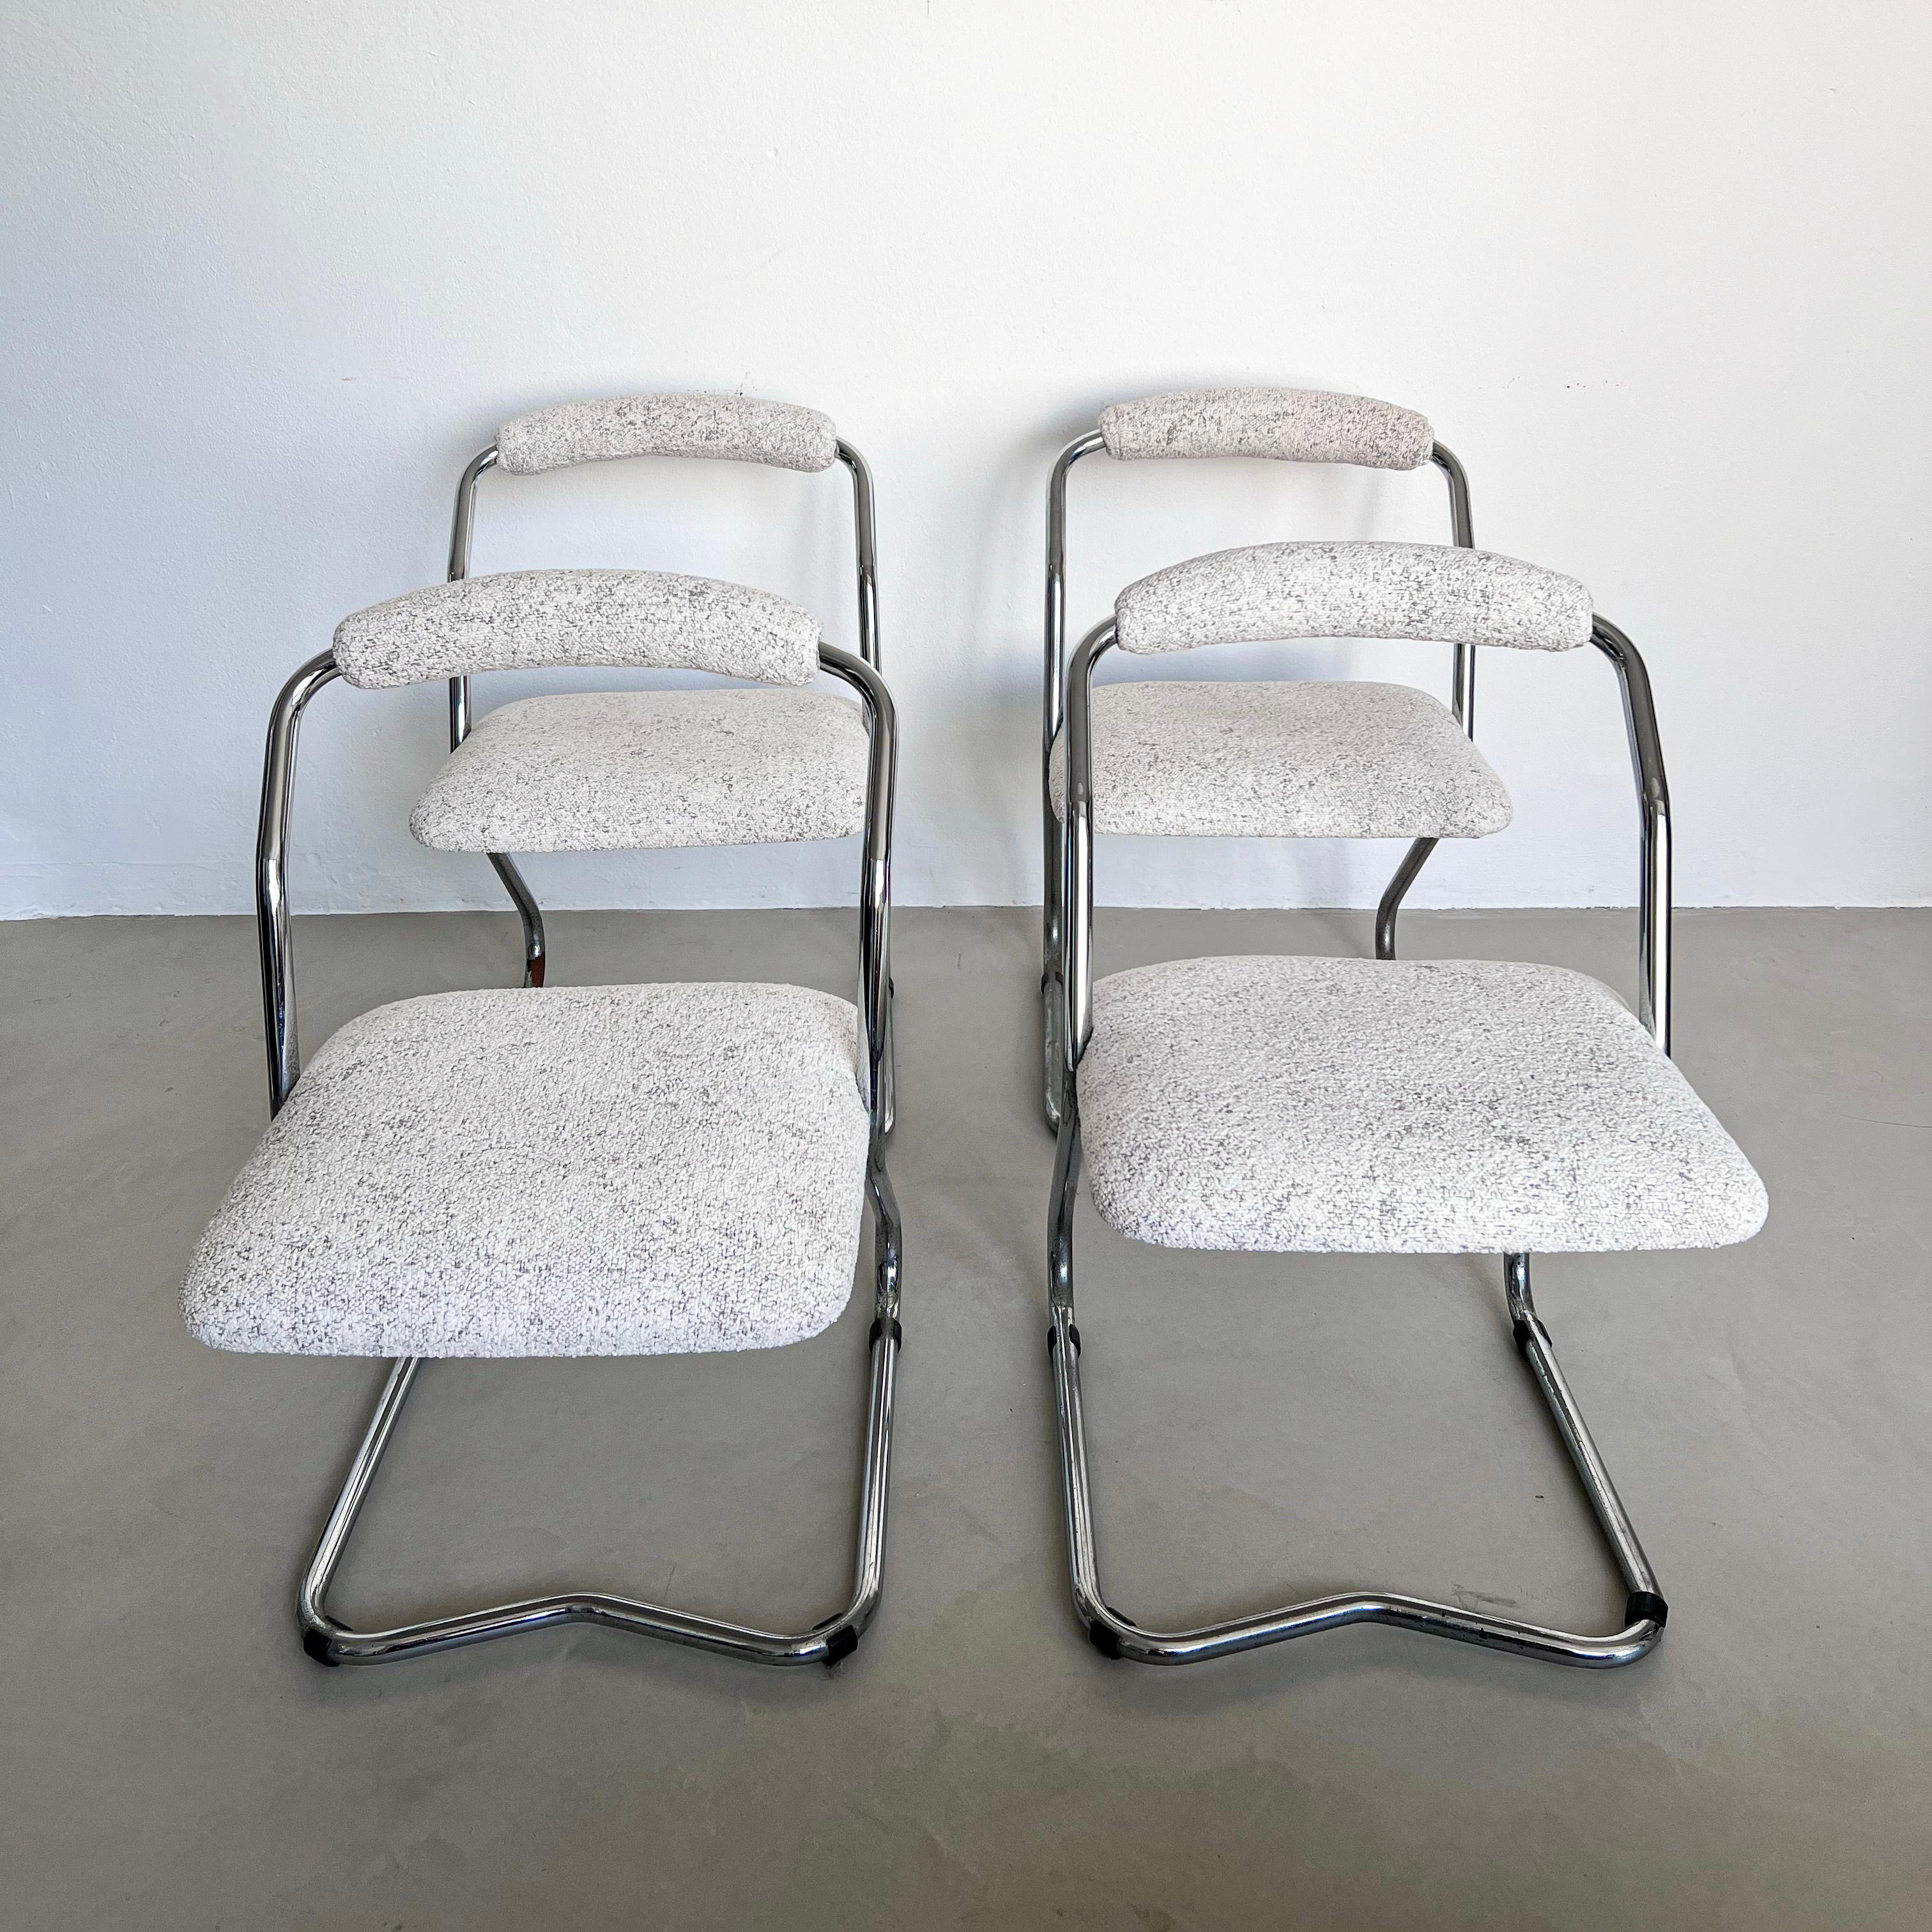 Set of four rare dining chairs, made in Italy in the 1960s and designed by Giotto Stoppino  just been redone in a beautiful white bouclé fabric by Dedar Milano. Crafted in chromed metal tubular, they have a very distinctive line thanks to the